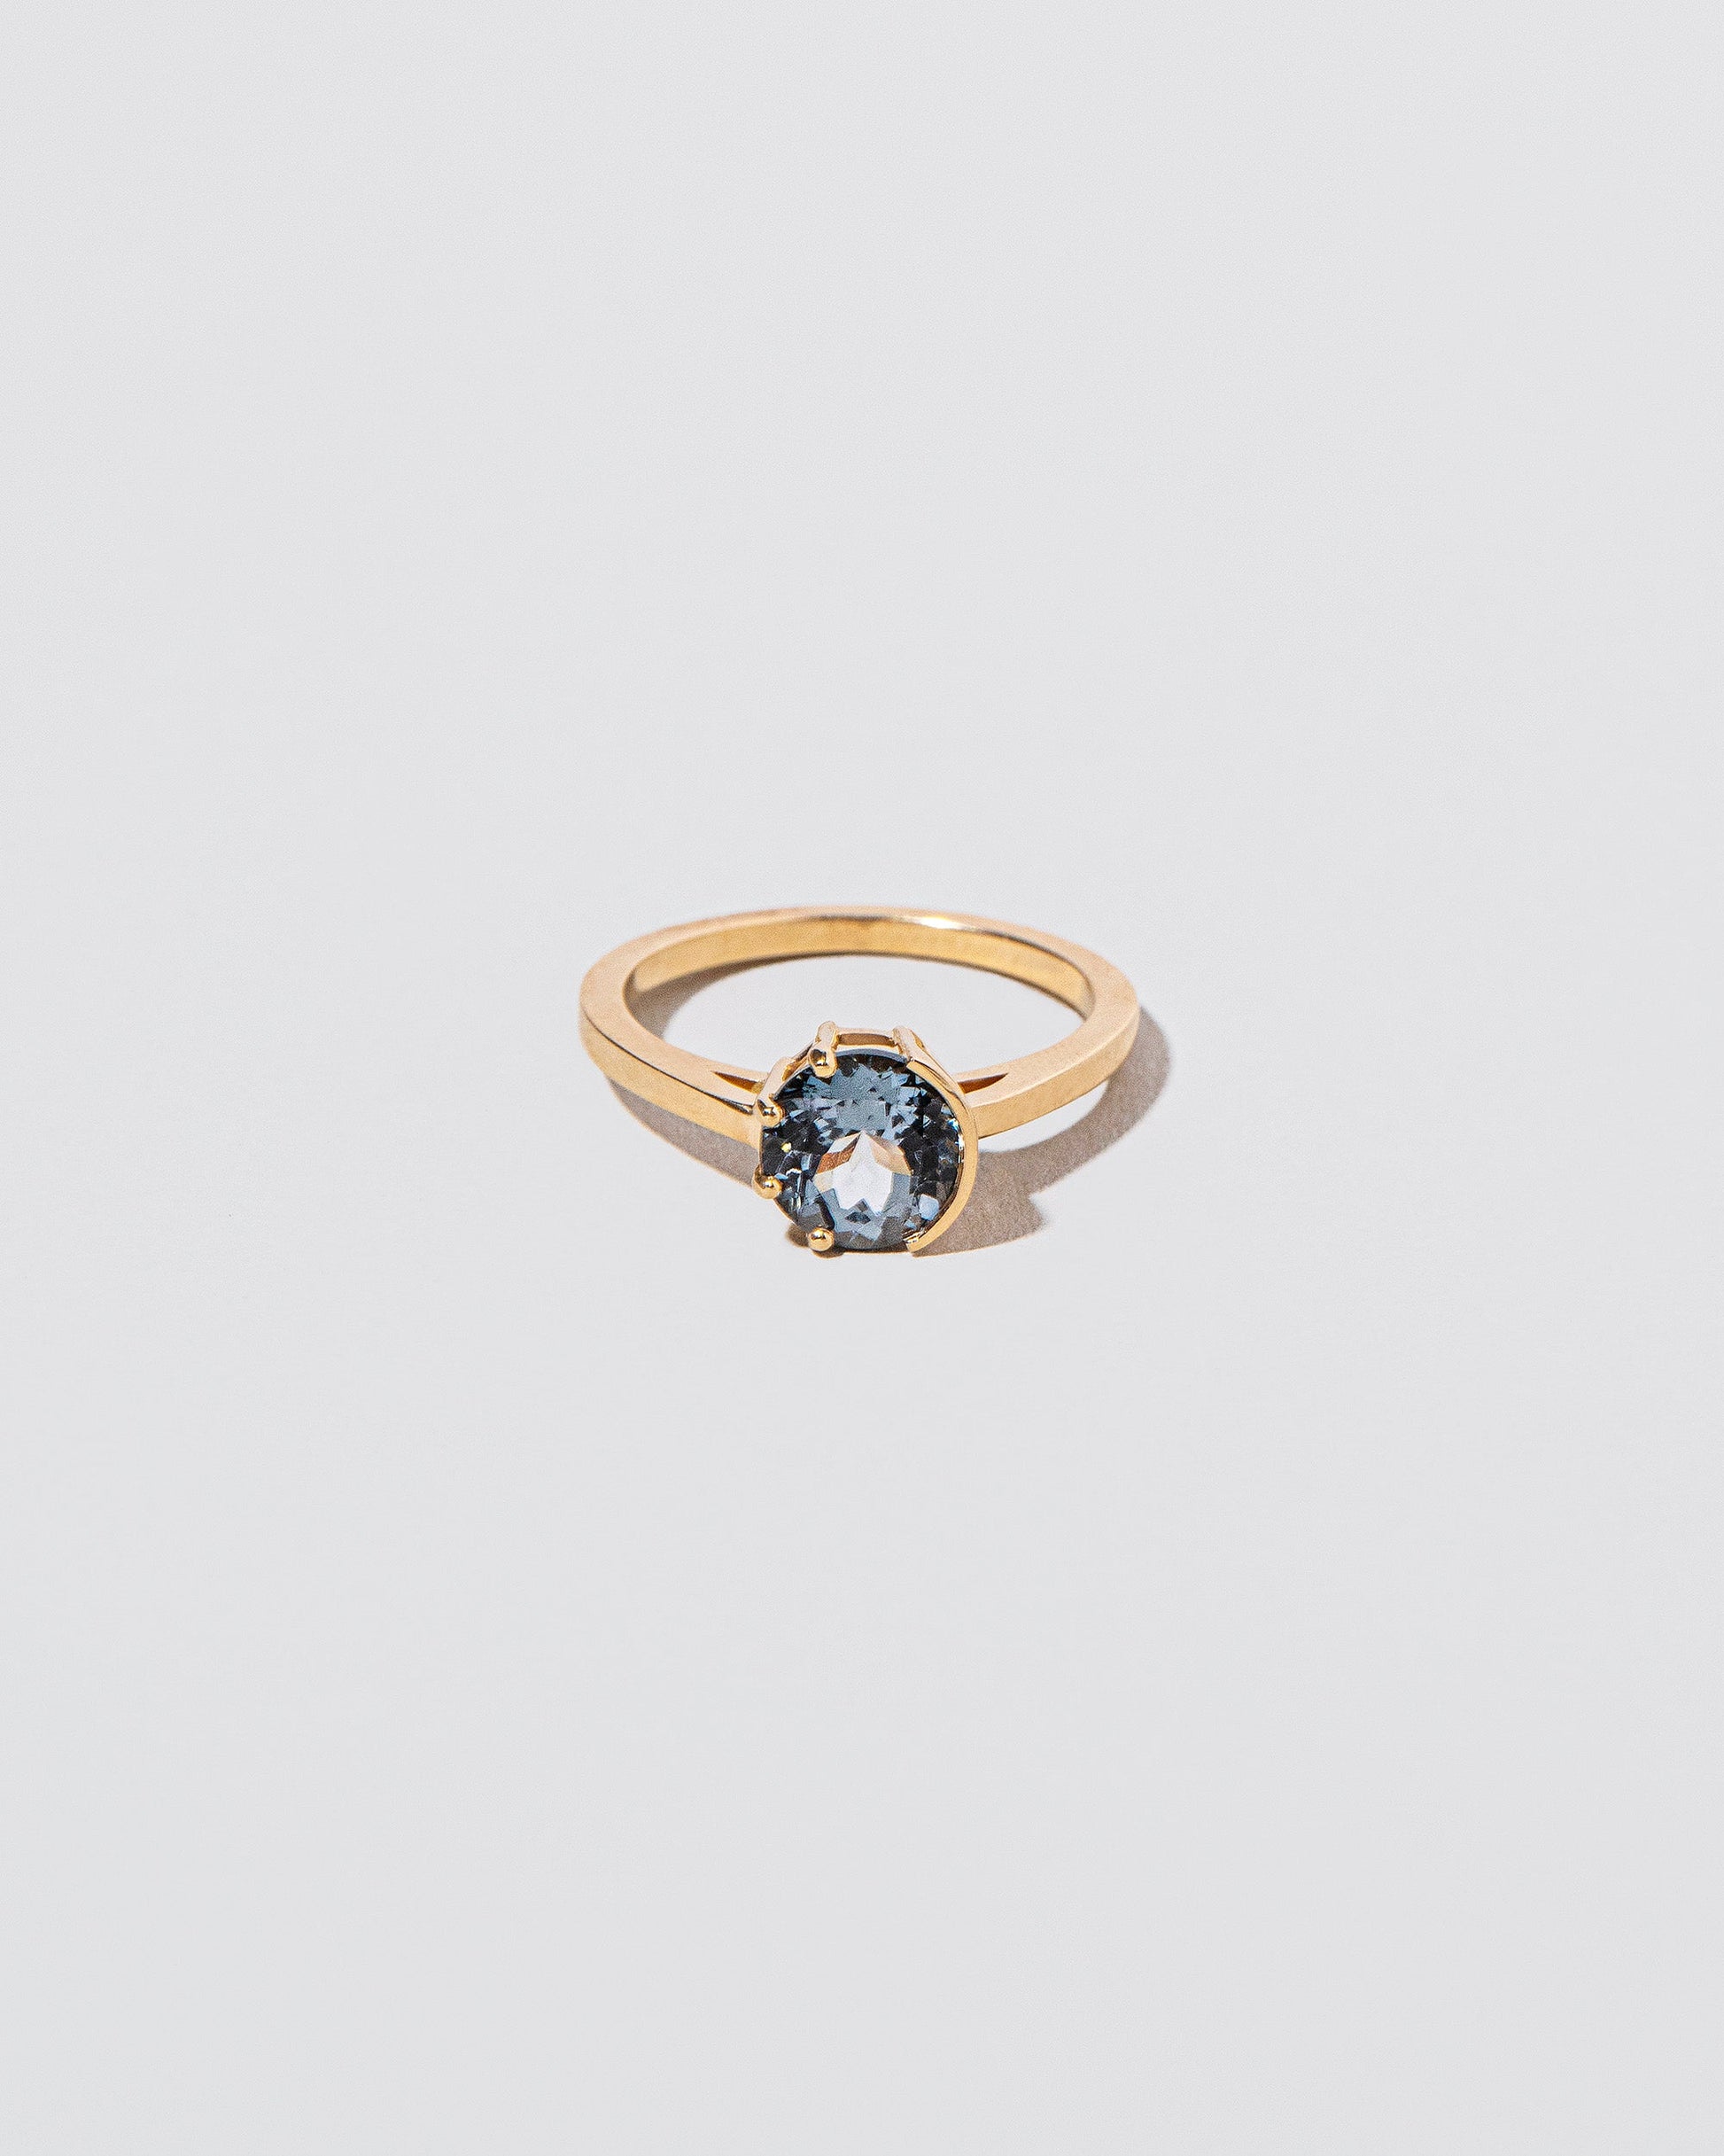  Sun & Moon Ring - Spinel on light color background.